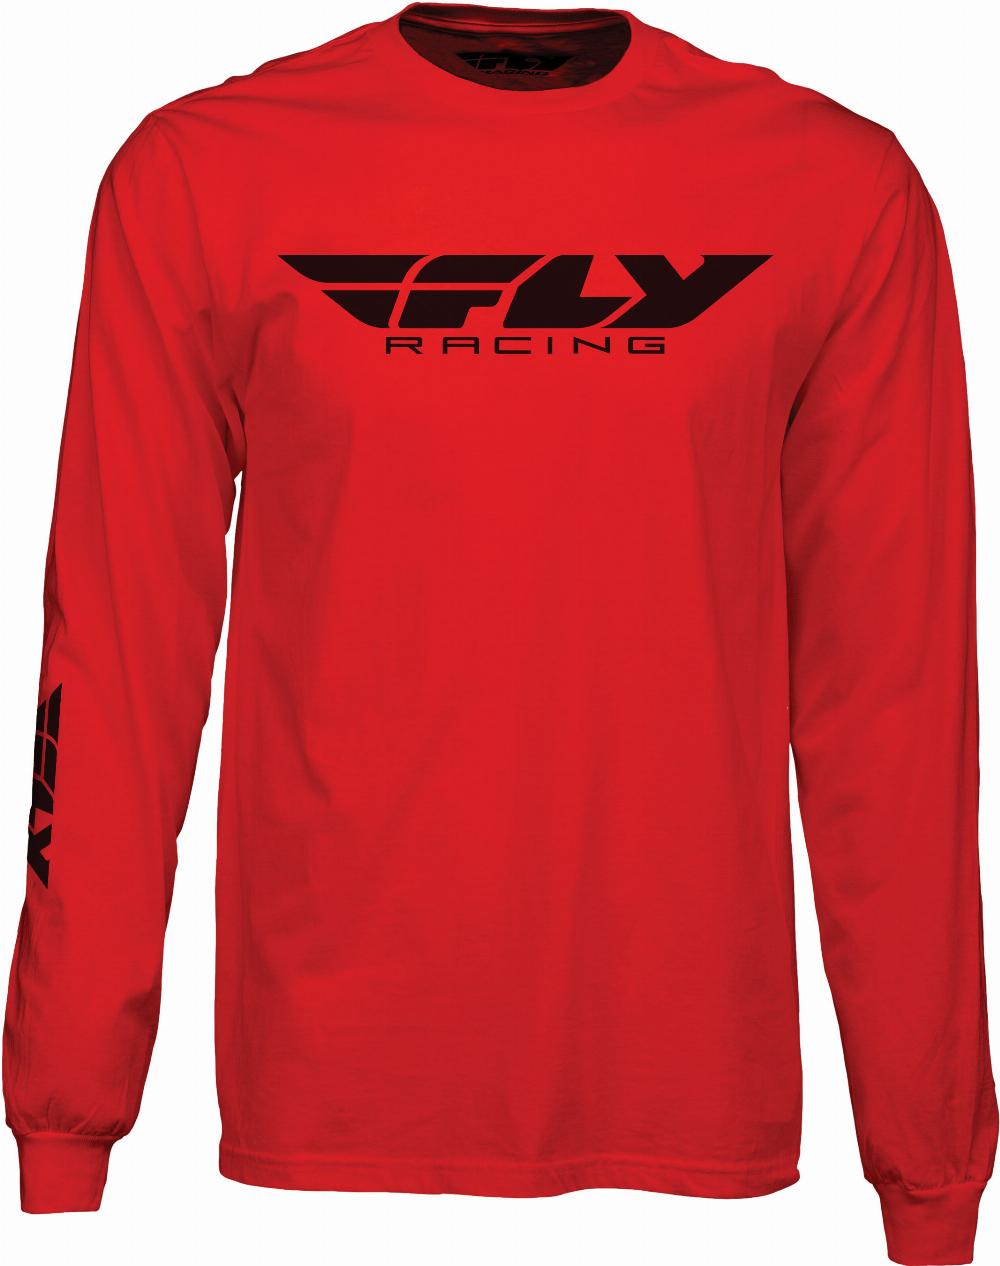 FLY CORPORATE L/S TEE RED LG#mpn_352-4148L